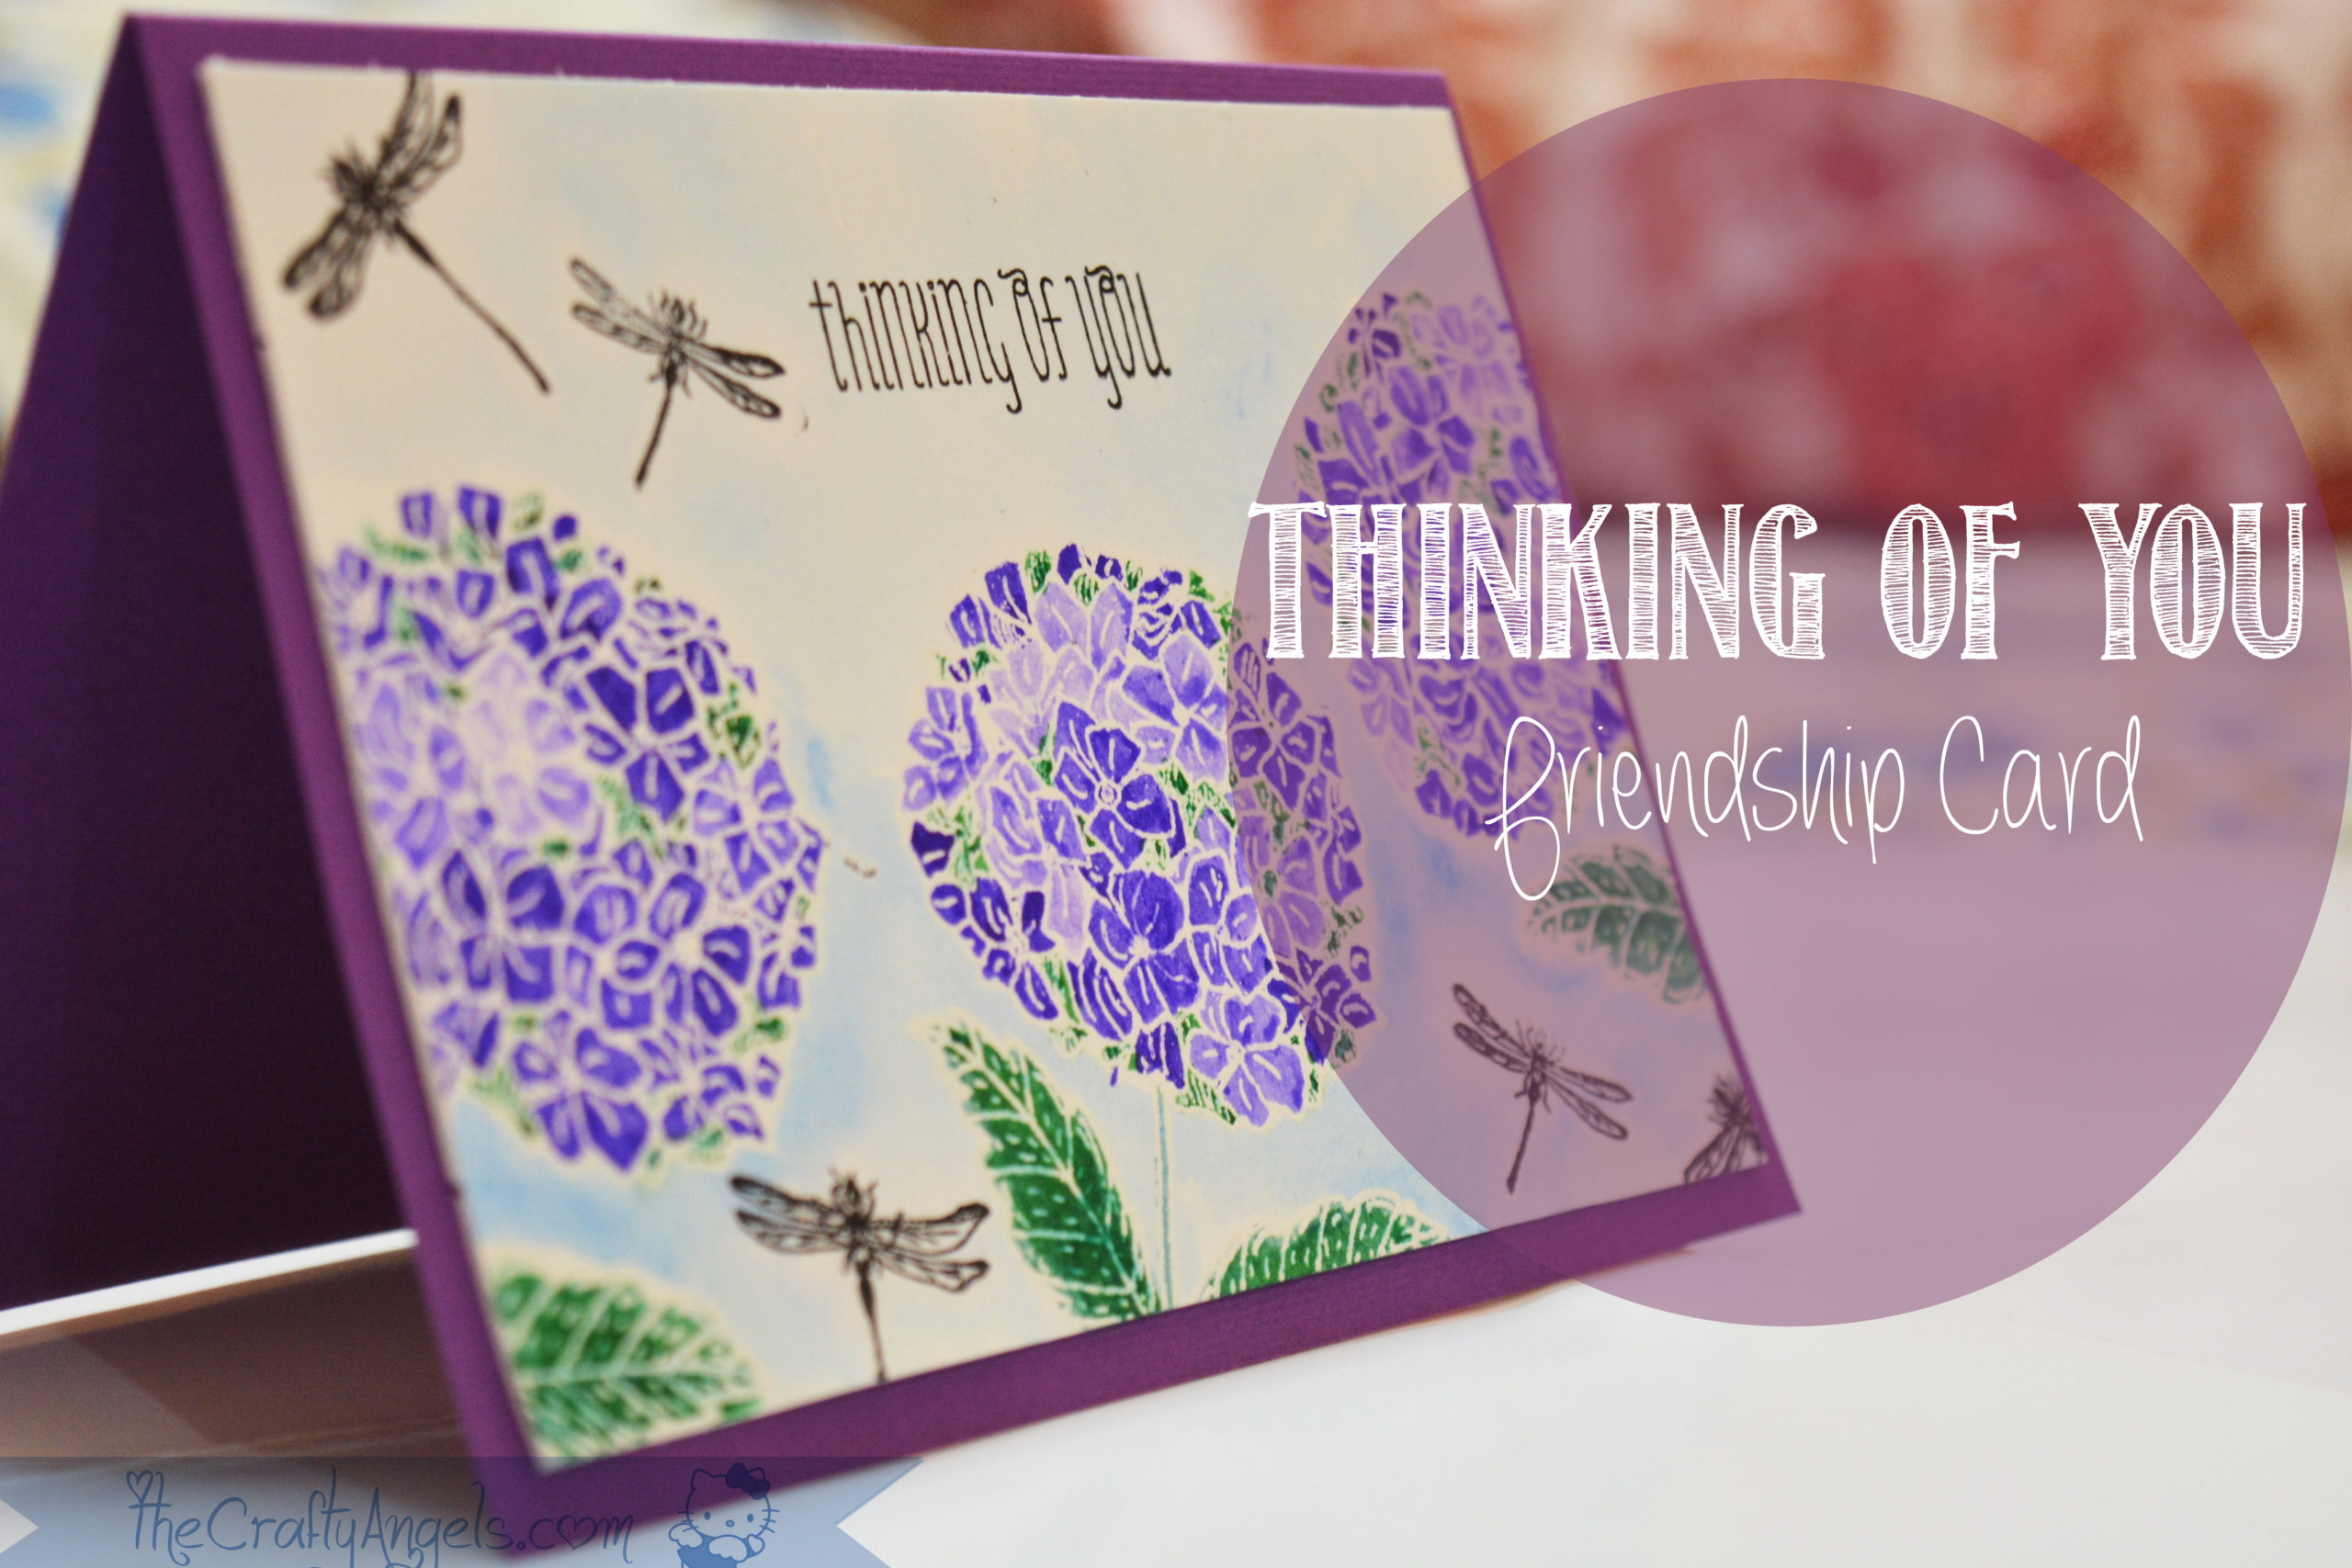 Friendship Card with tagline : “Thinking of you”